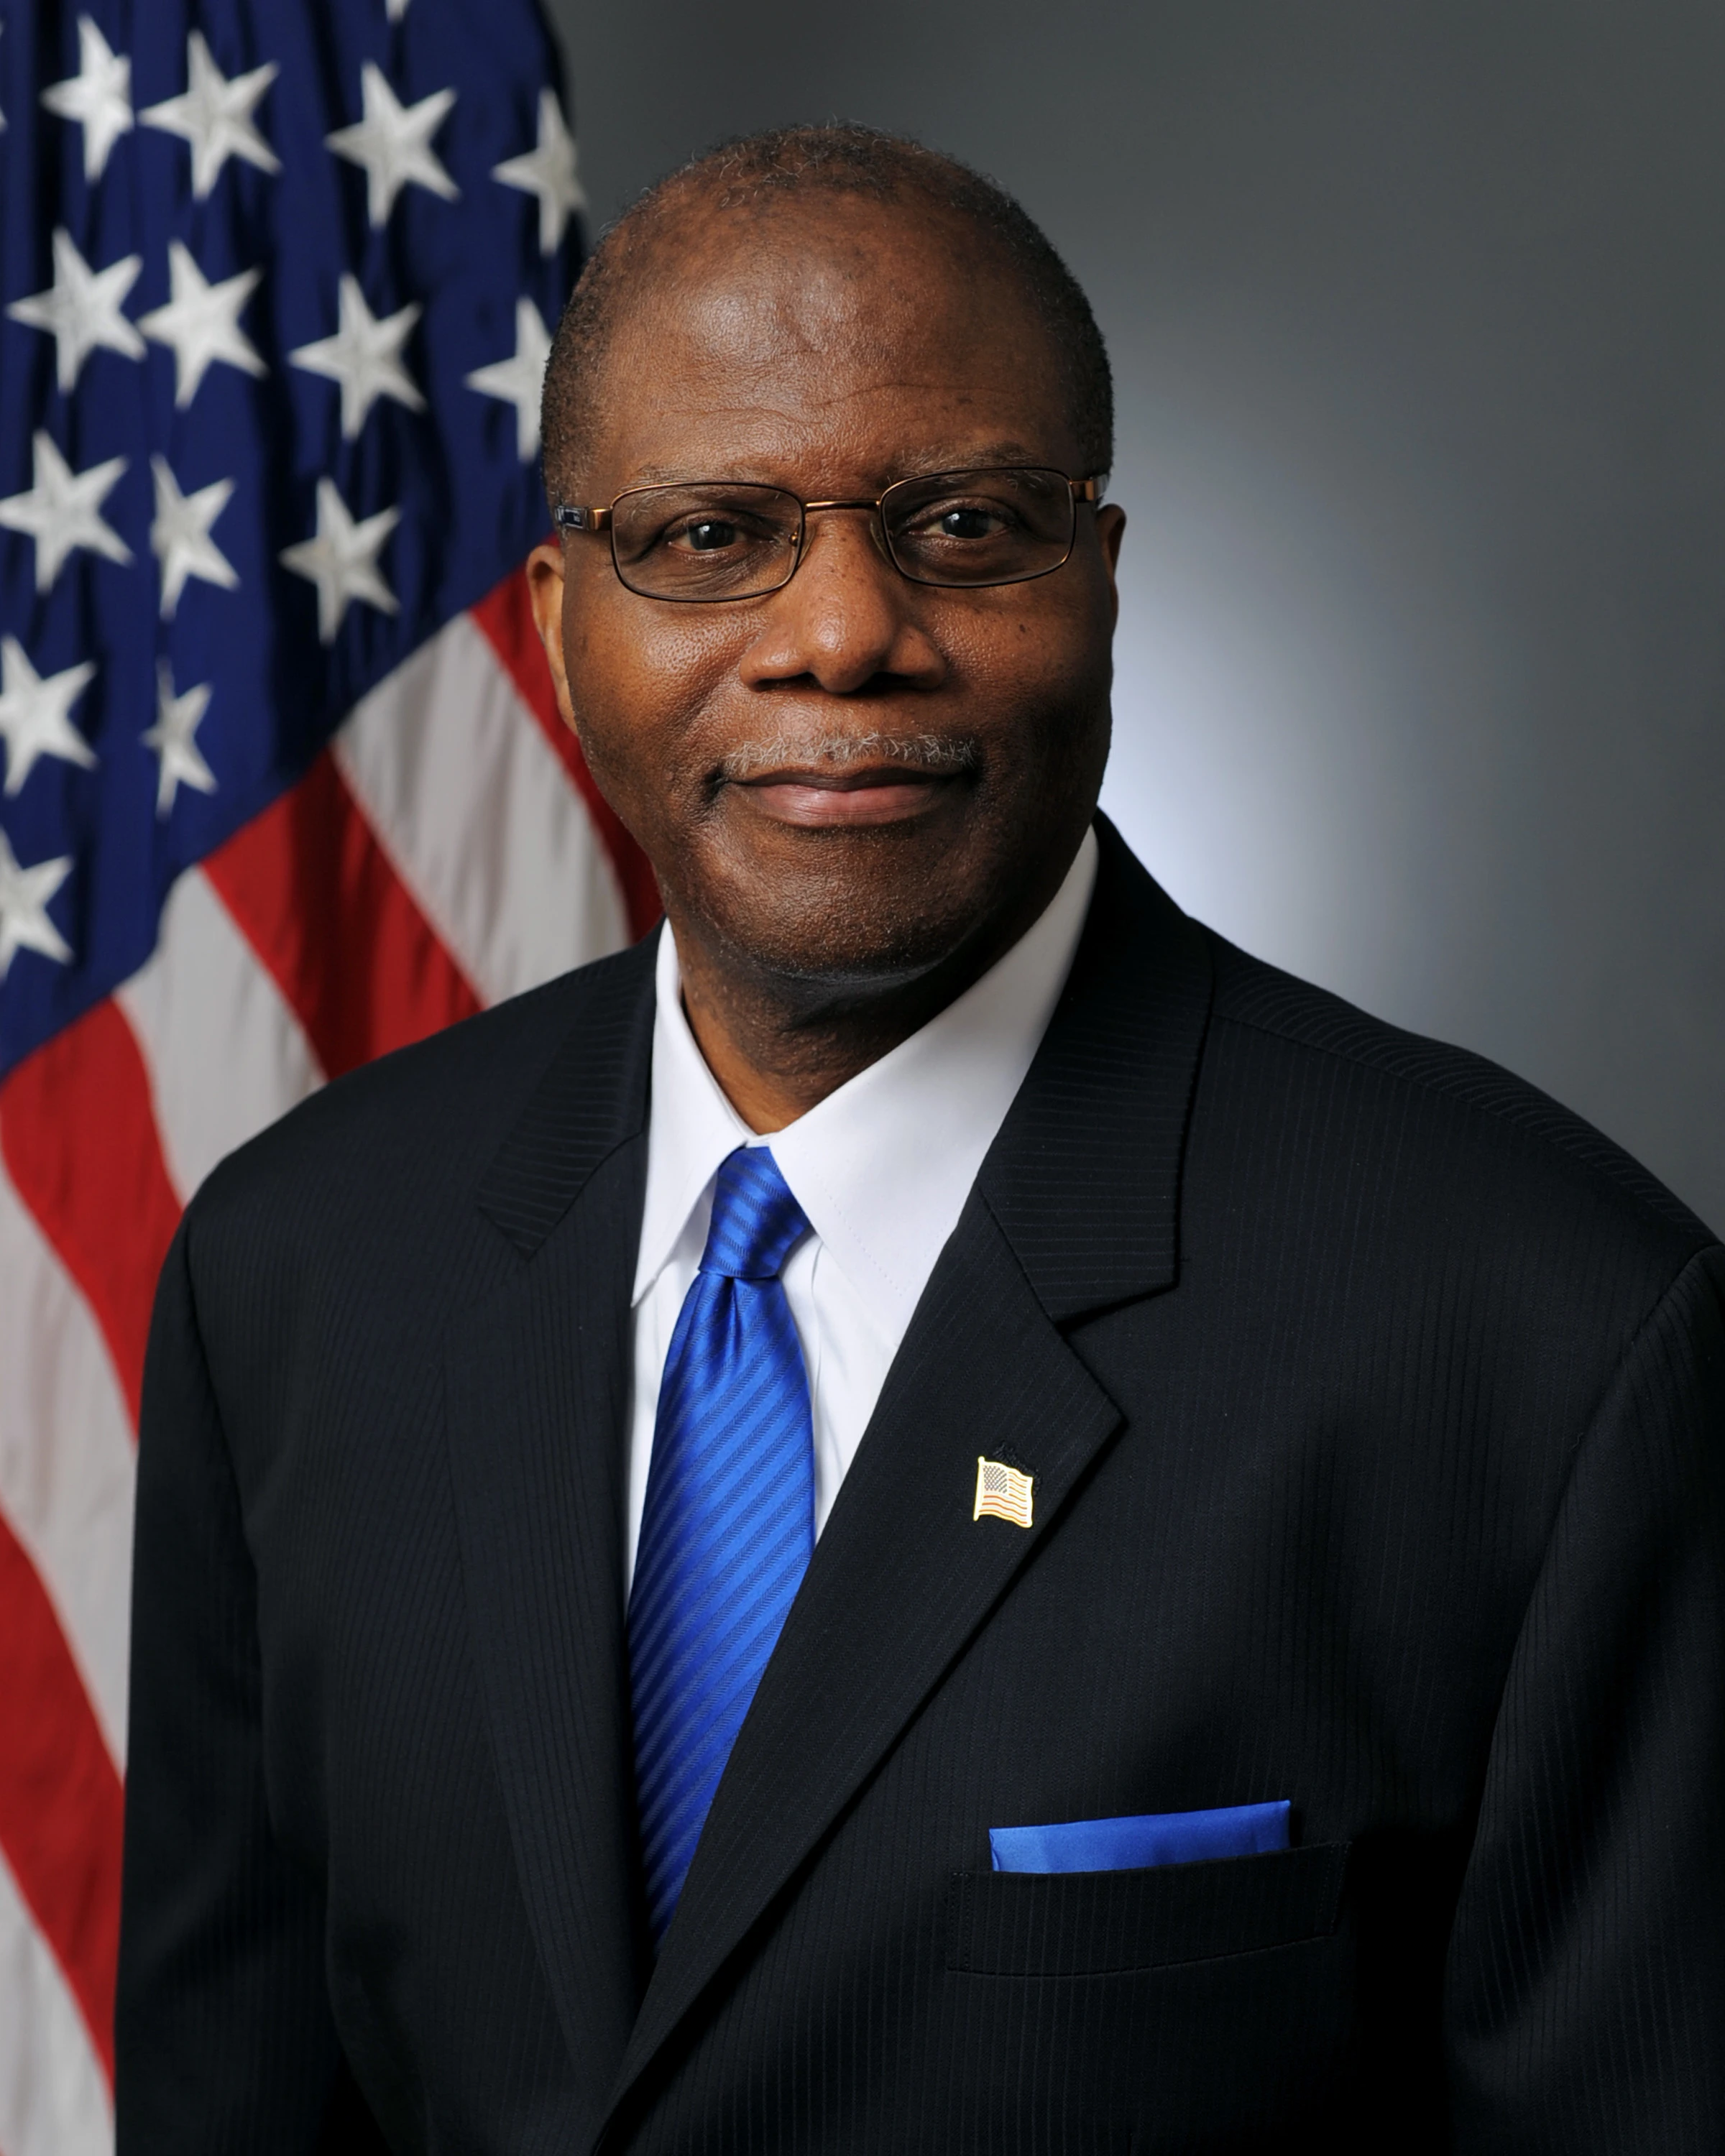 Ronald S. Moultrie - Under Secretary of Defense for Intelligence & Security (USD(I&S))